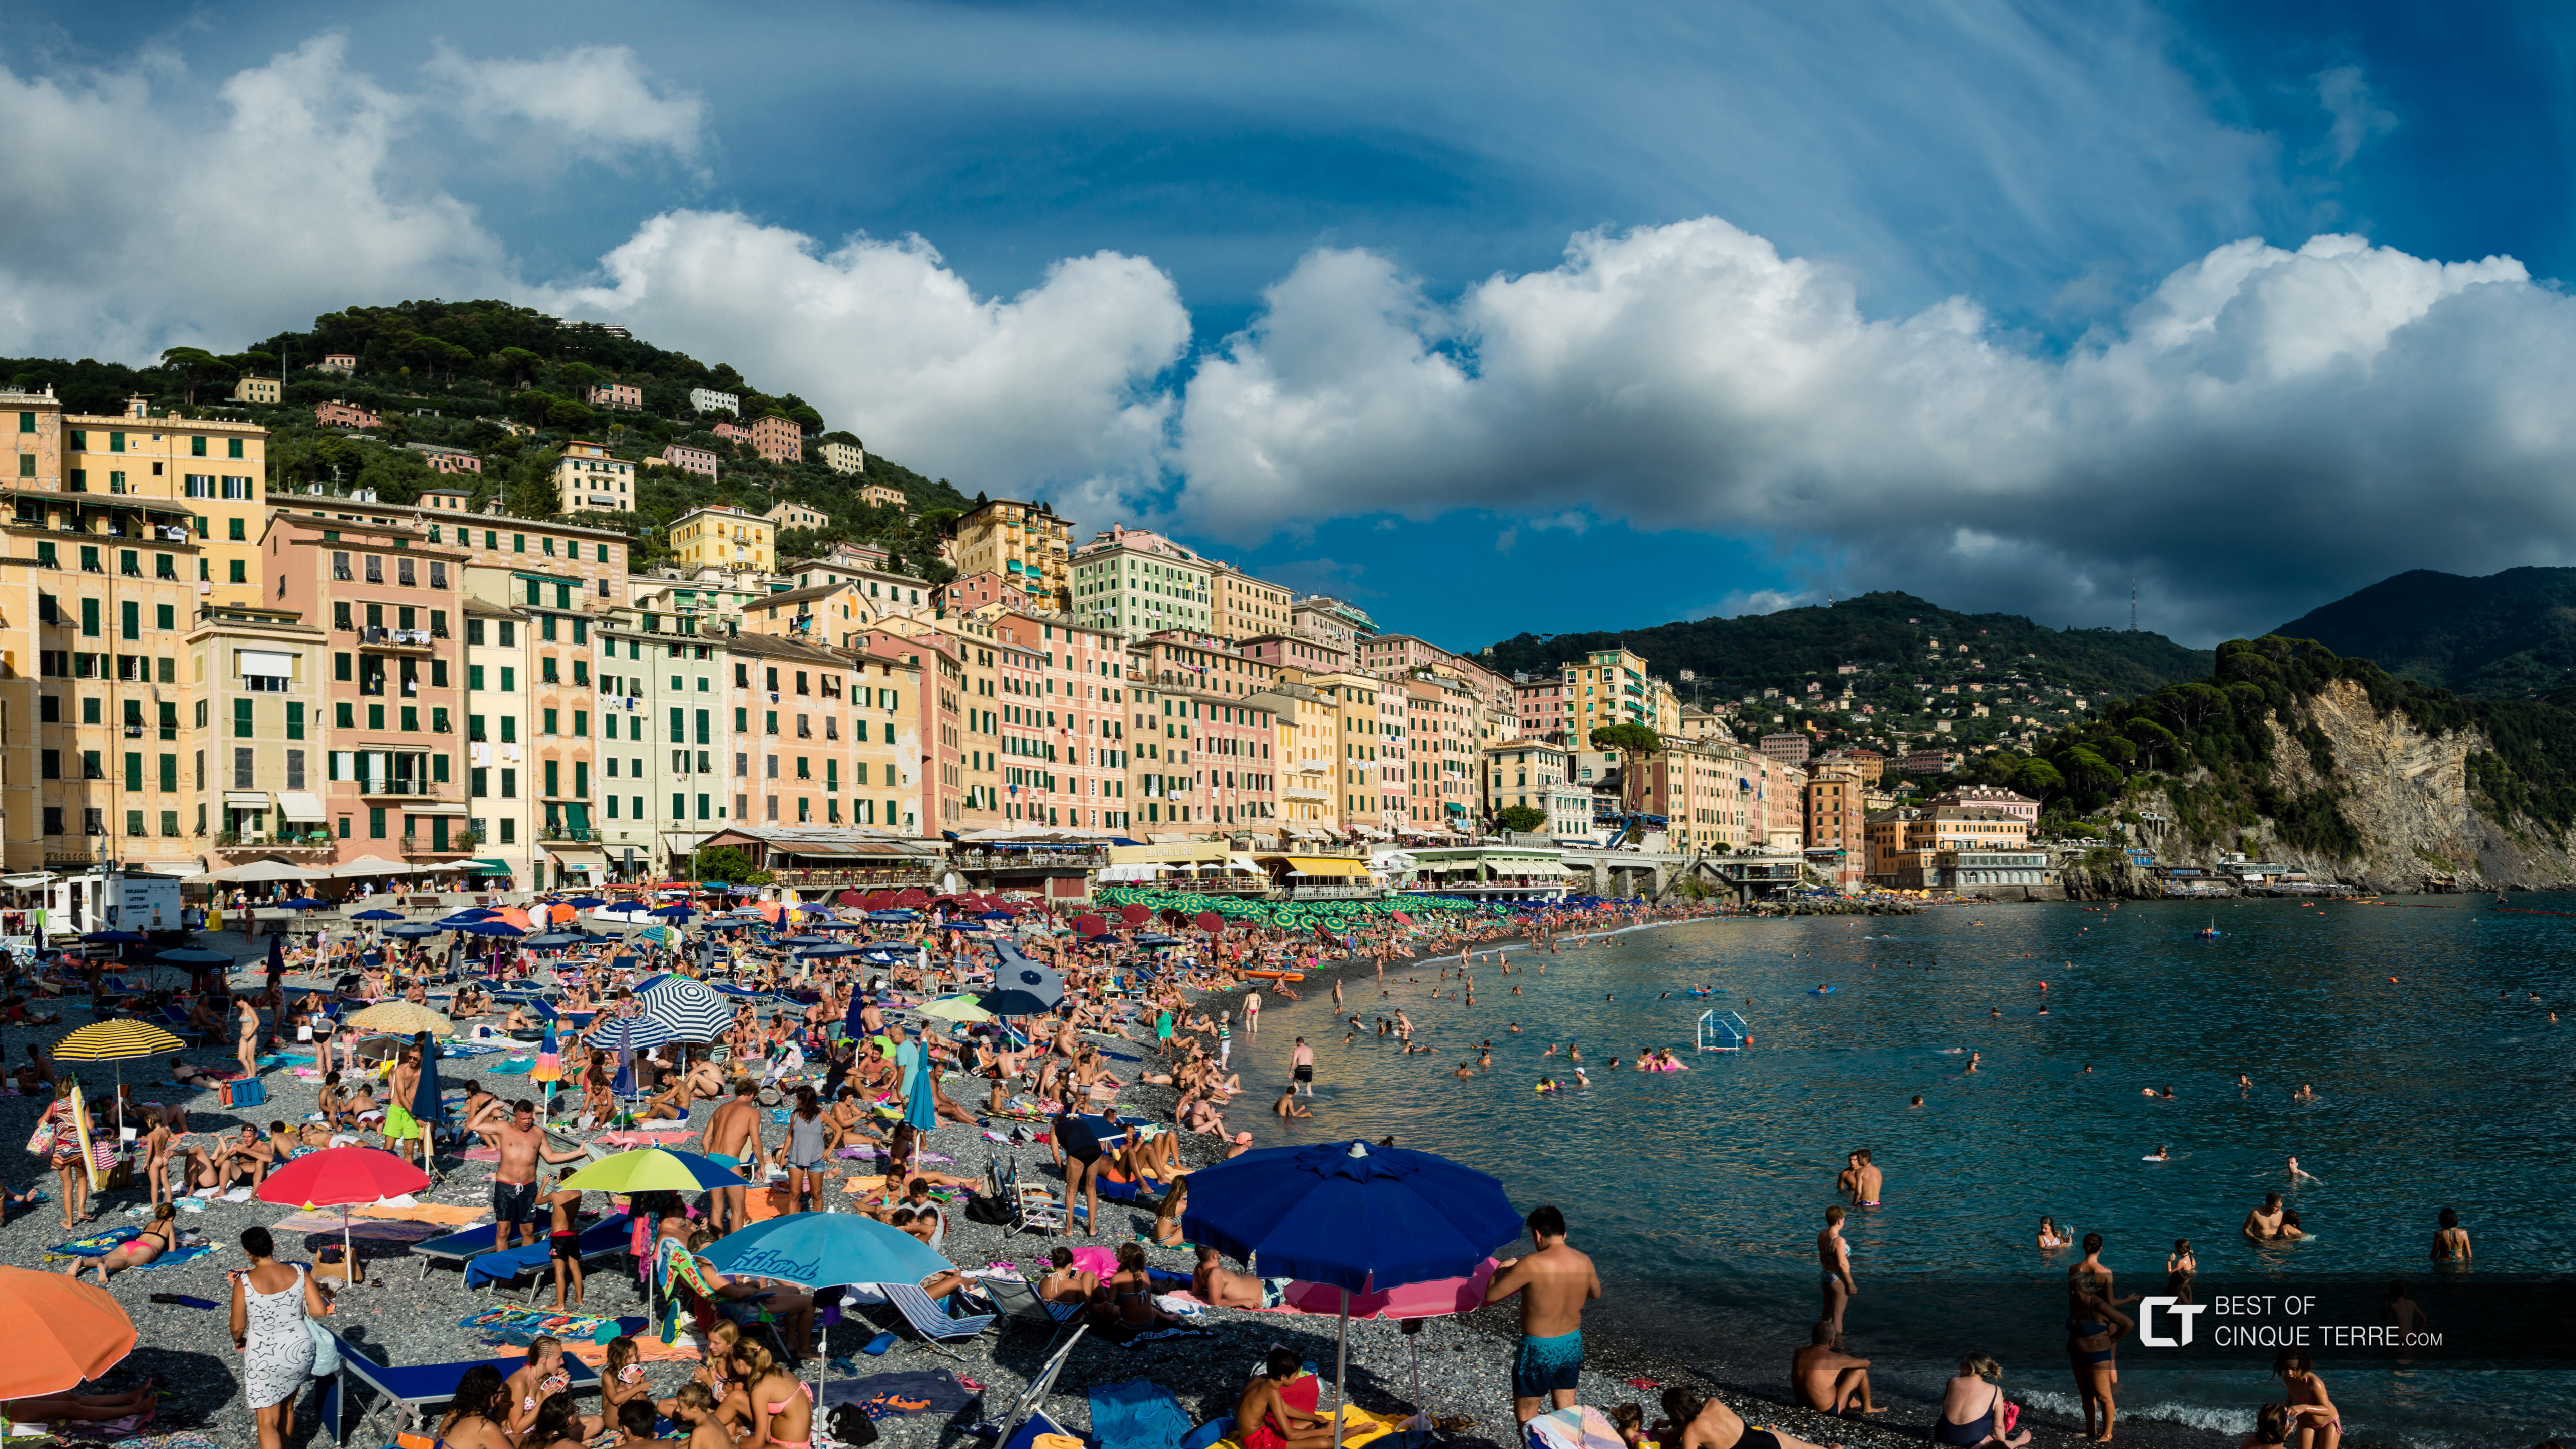 The seafront and the beach, Camogli, Italy